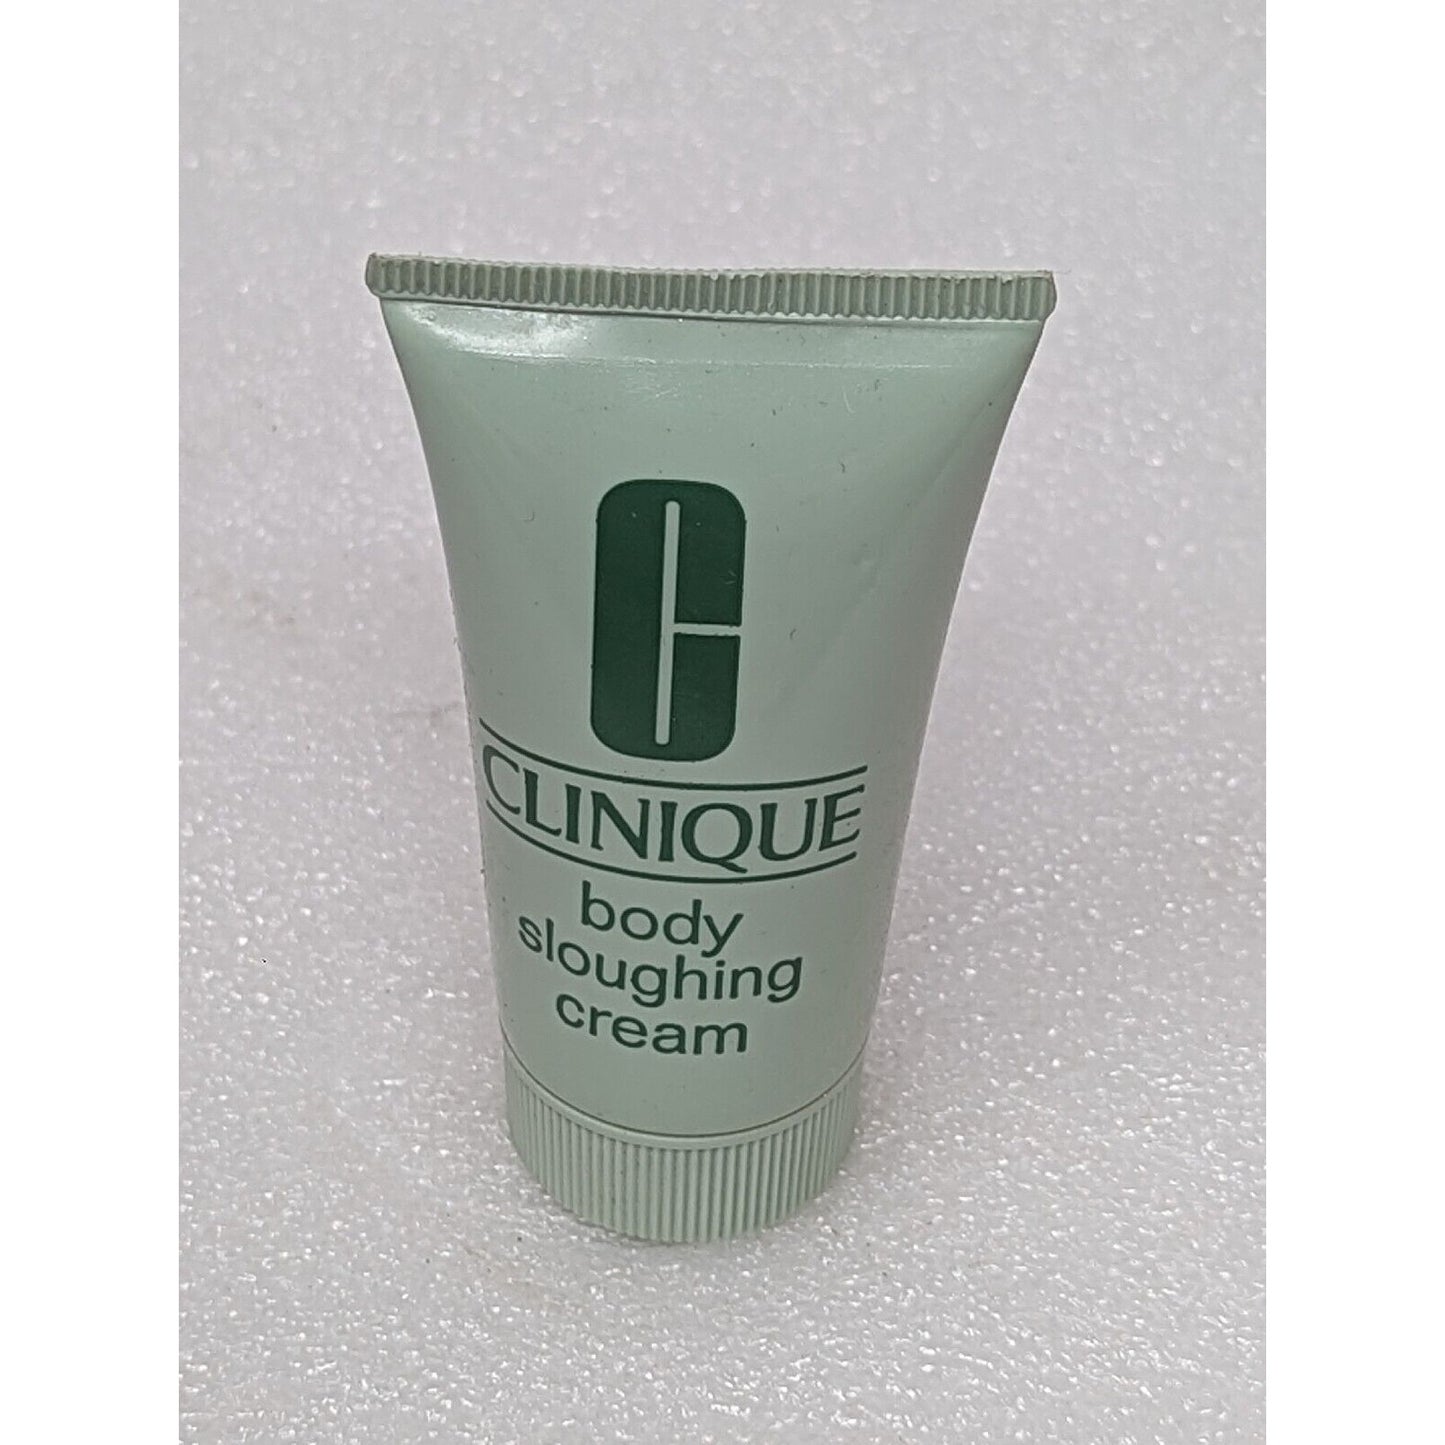 Clinique Body Sloughing Cream 1 Oz Travel Size